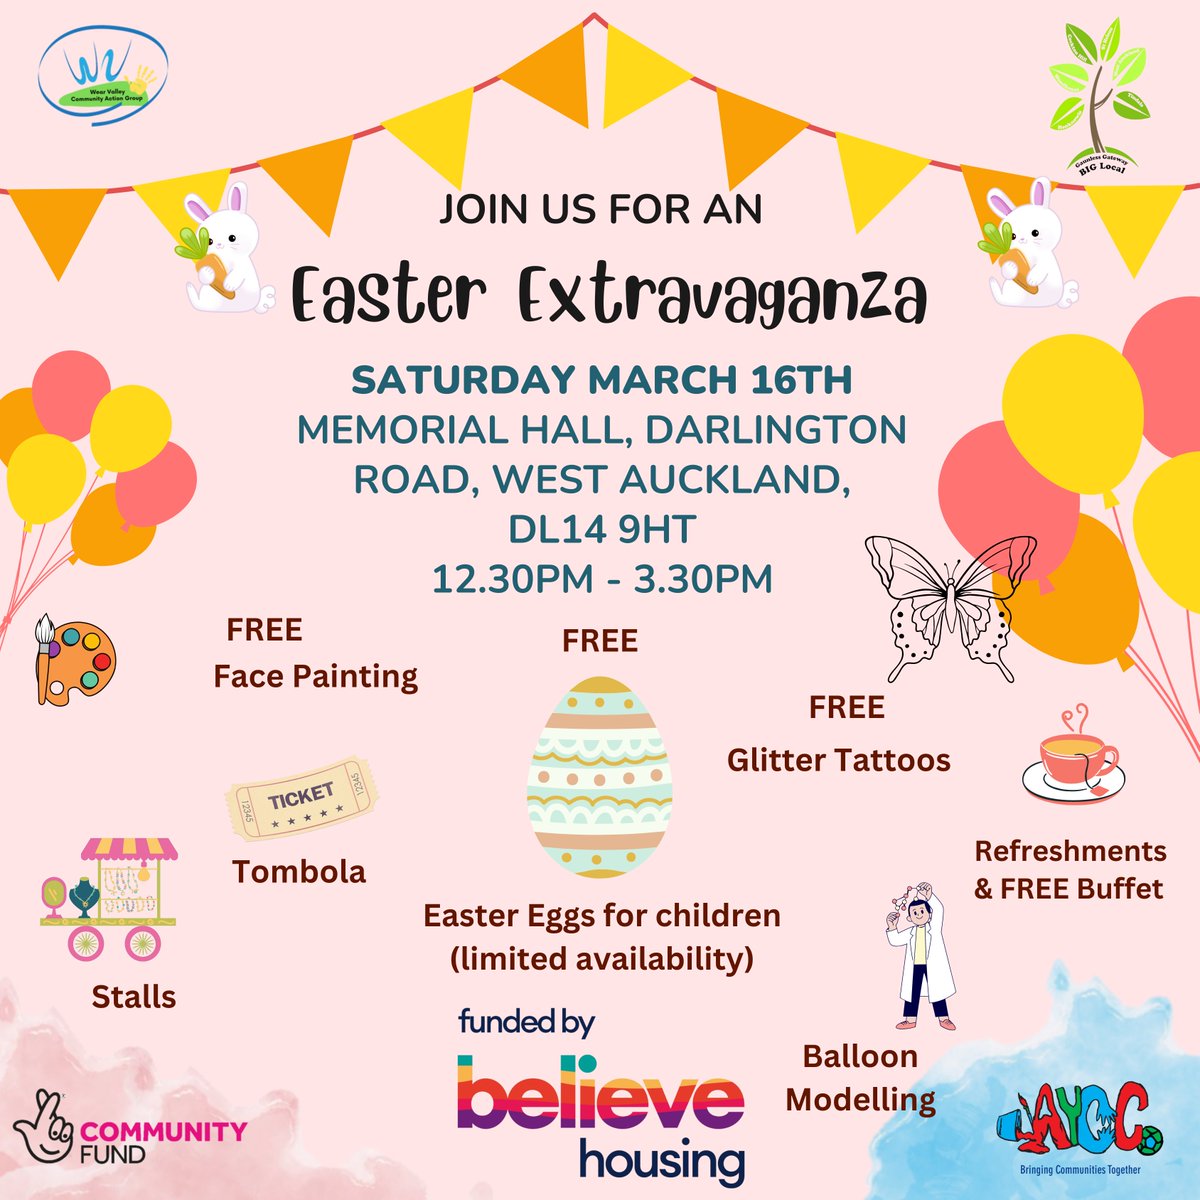 Join us for our Easter Extravaganza! happening on SATURDAY MARCH 16TH MEMORIAL HALL 12.30PM - 3.30PM !🐰🐰Kindly funded by @believehousing